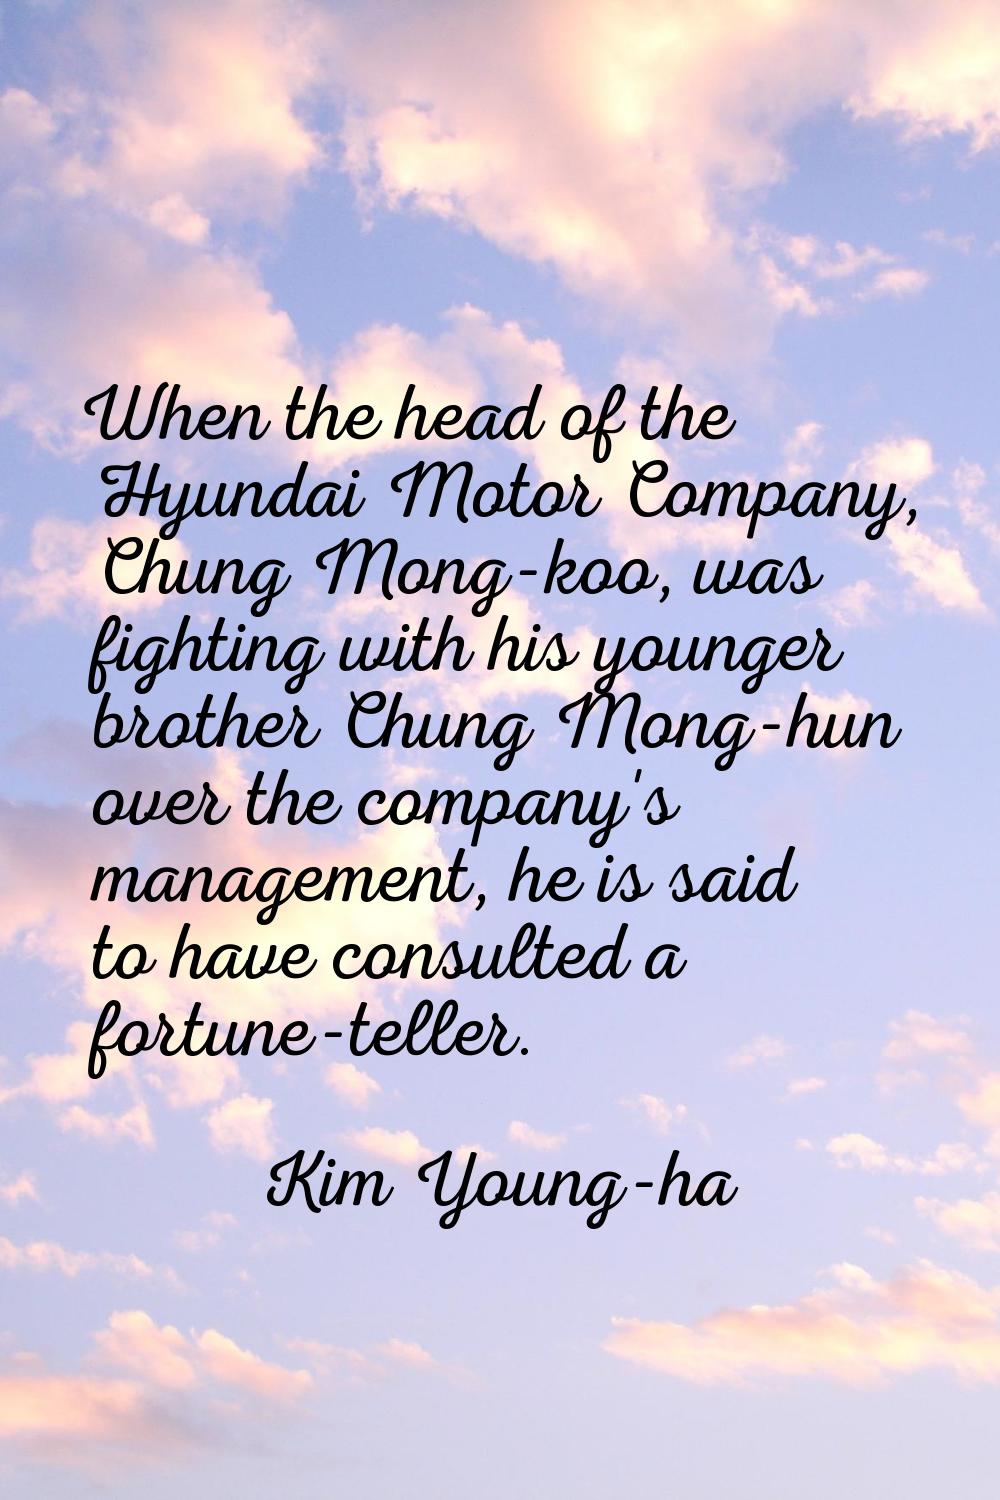 When the head of the Hyundai Motor Company, Chung Mong-koo, was fighting with his younger brother C